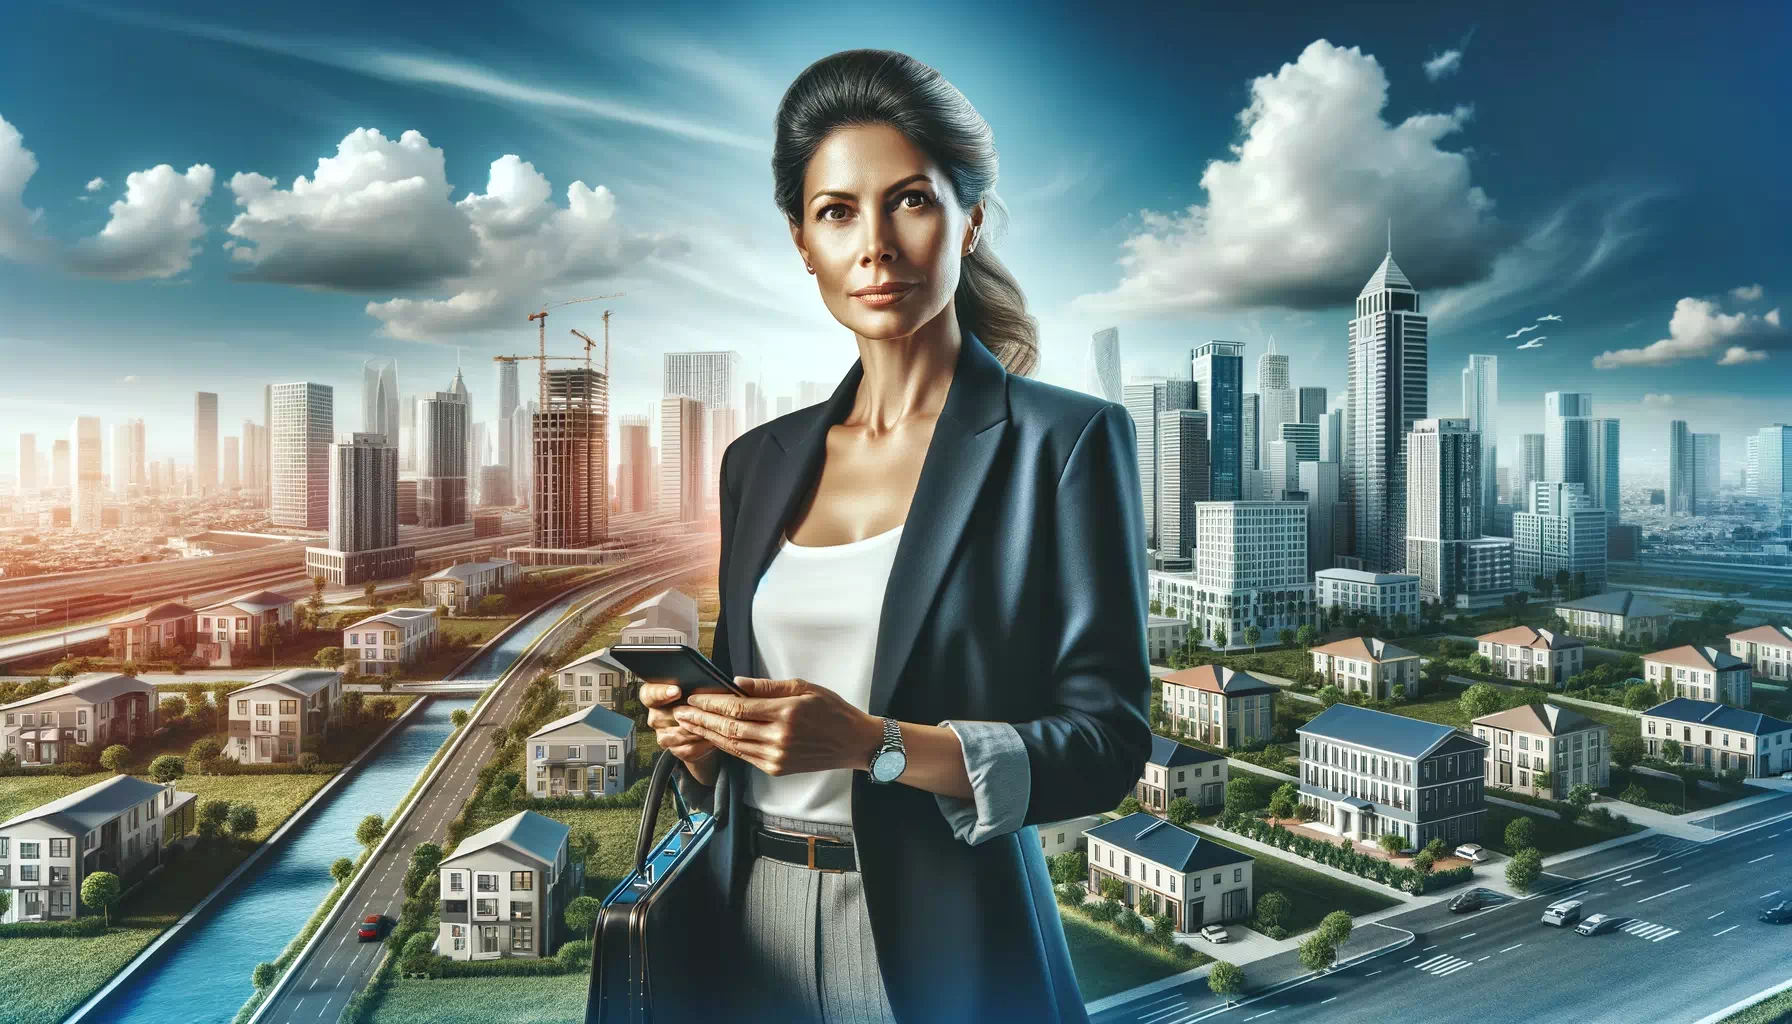 A woman holding a cell phone in front of a city to maximize profits.